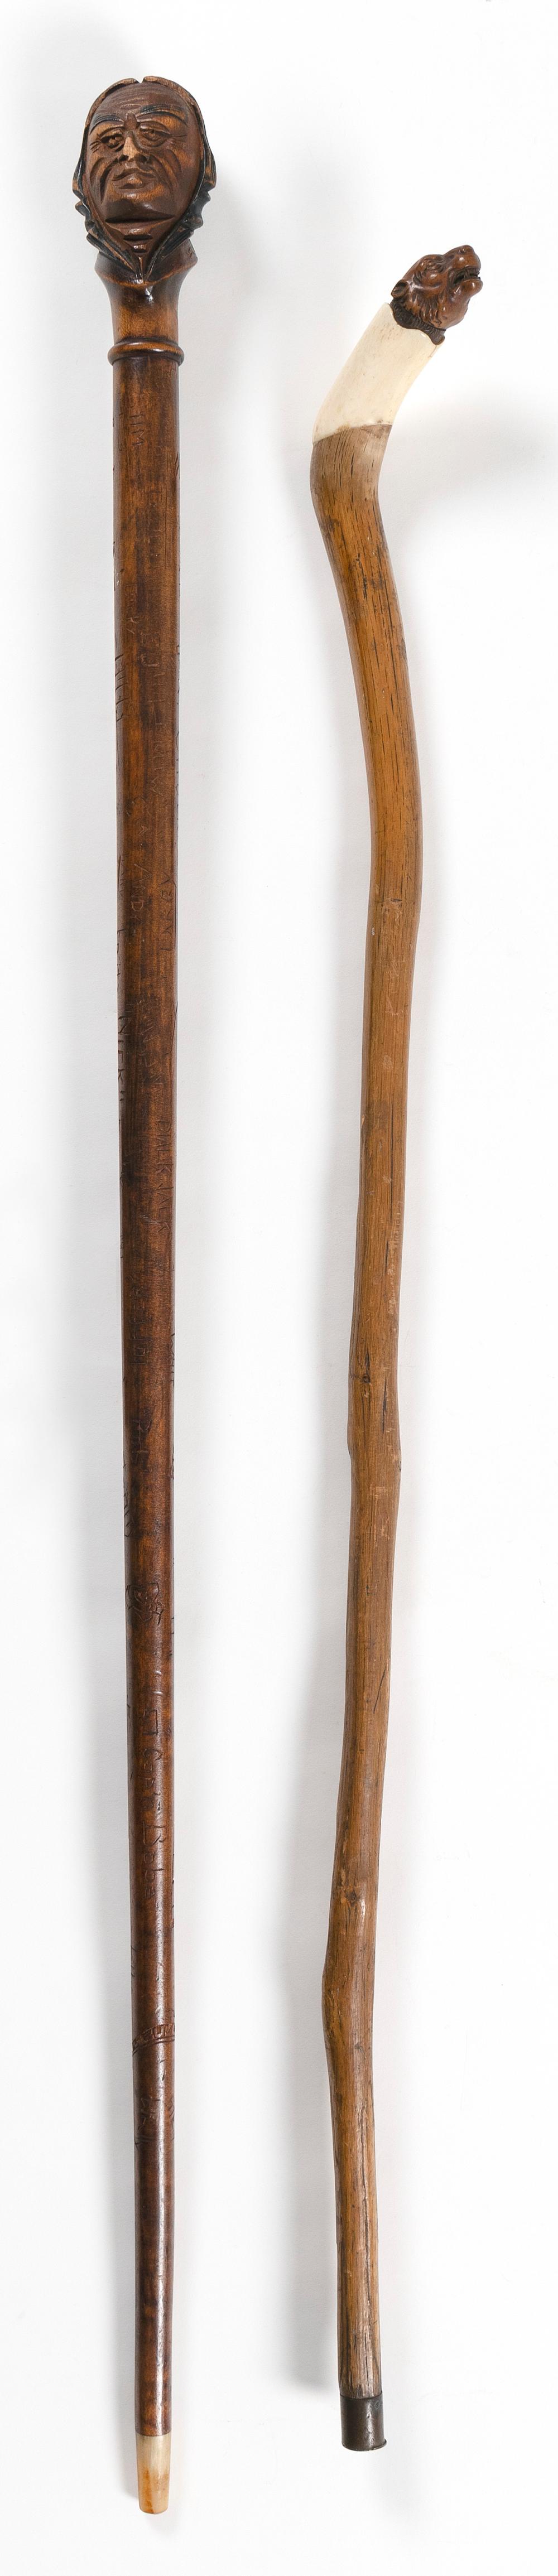 TWO CARVED WOODEN CANES 20TH CENTURY